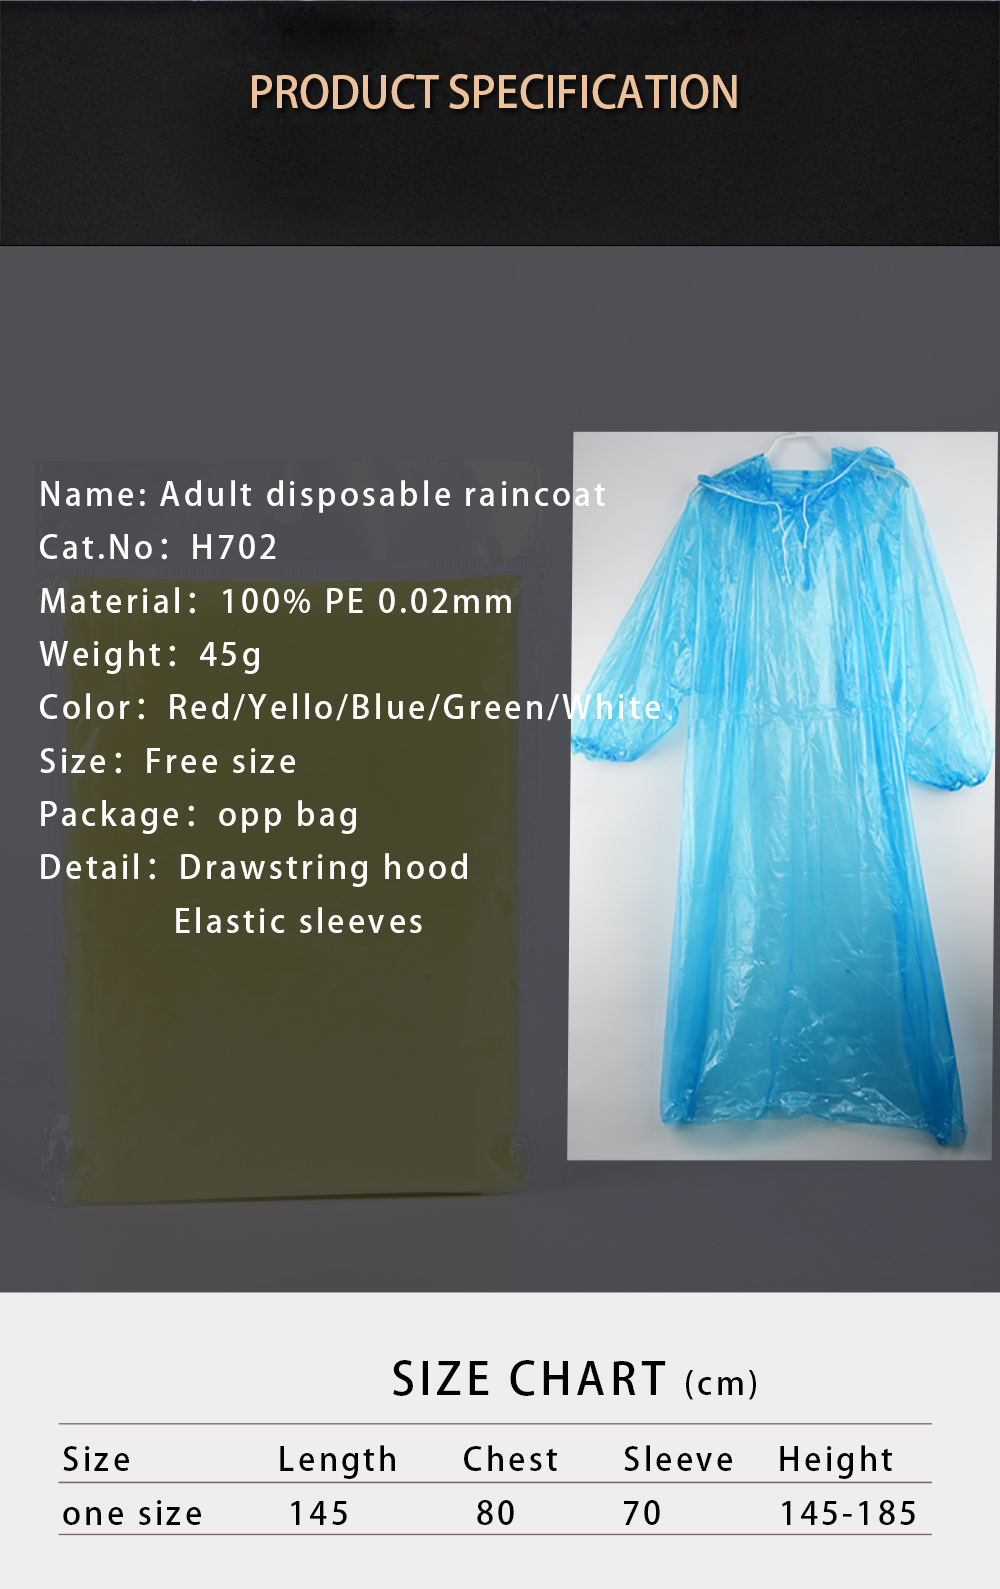 Emergency Disposable Raincoat for Adults with Drawstring Hood and Elastic Sleeve